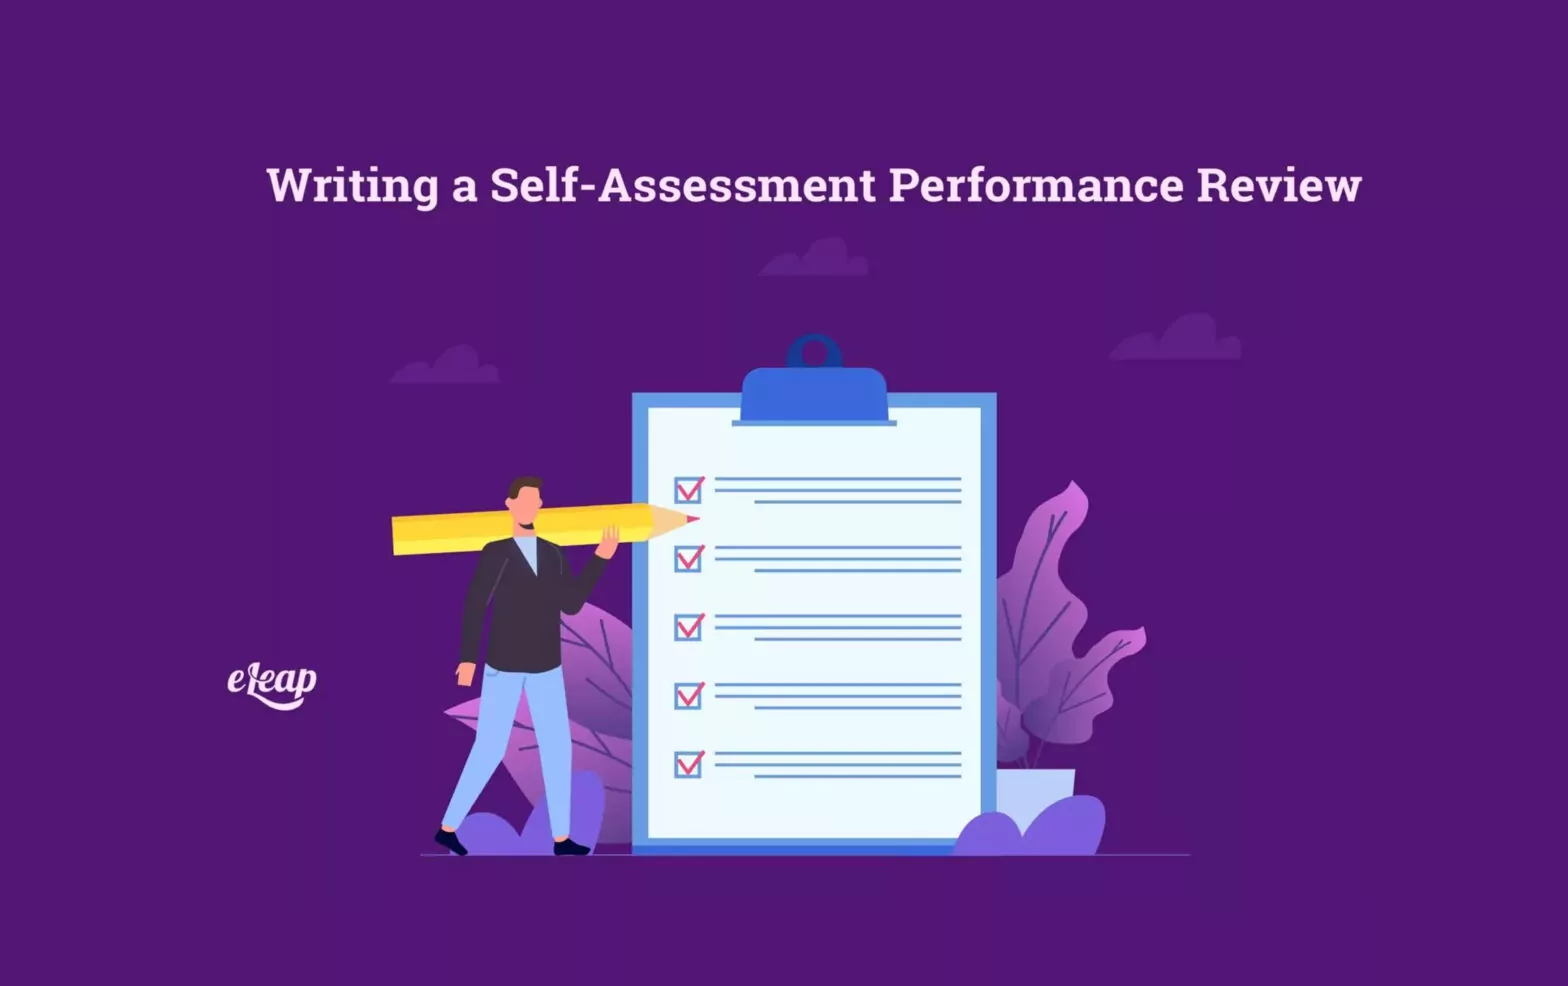 Writing a Self-Assessment Performance Review